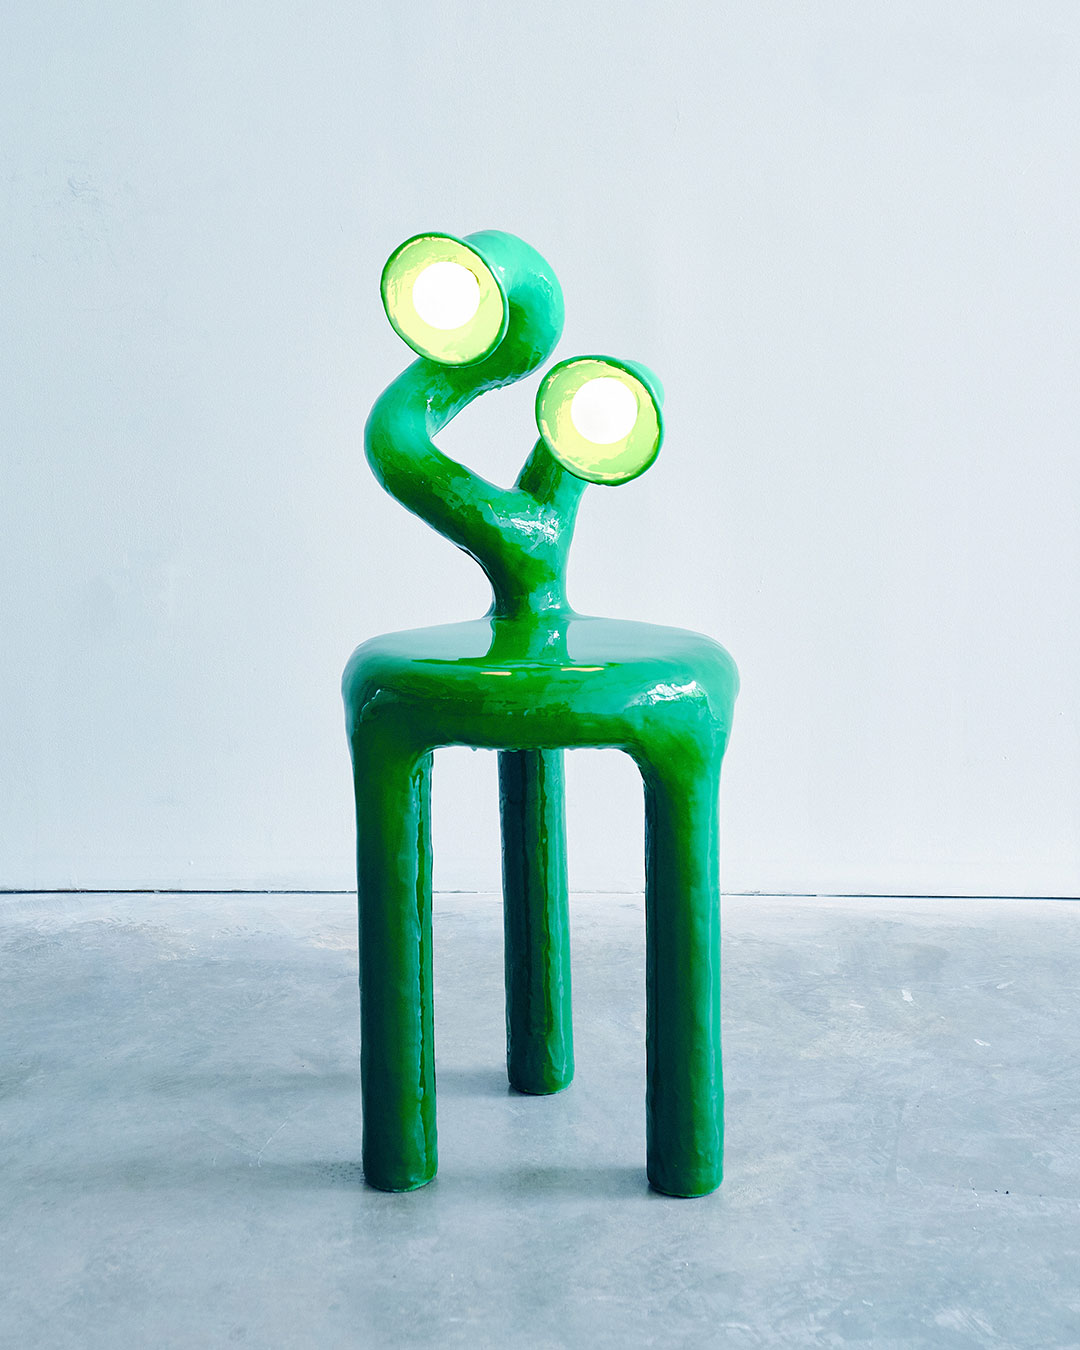 The green two-headed side table lamp